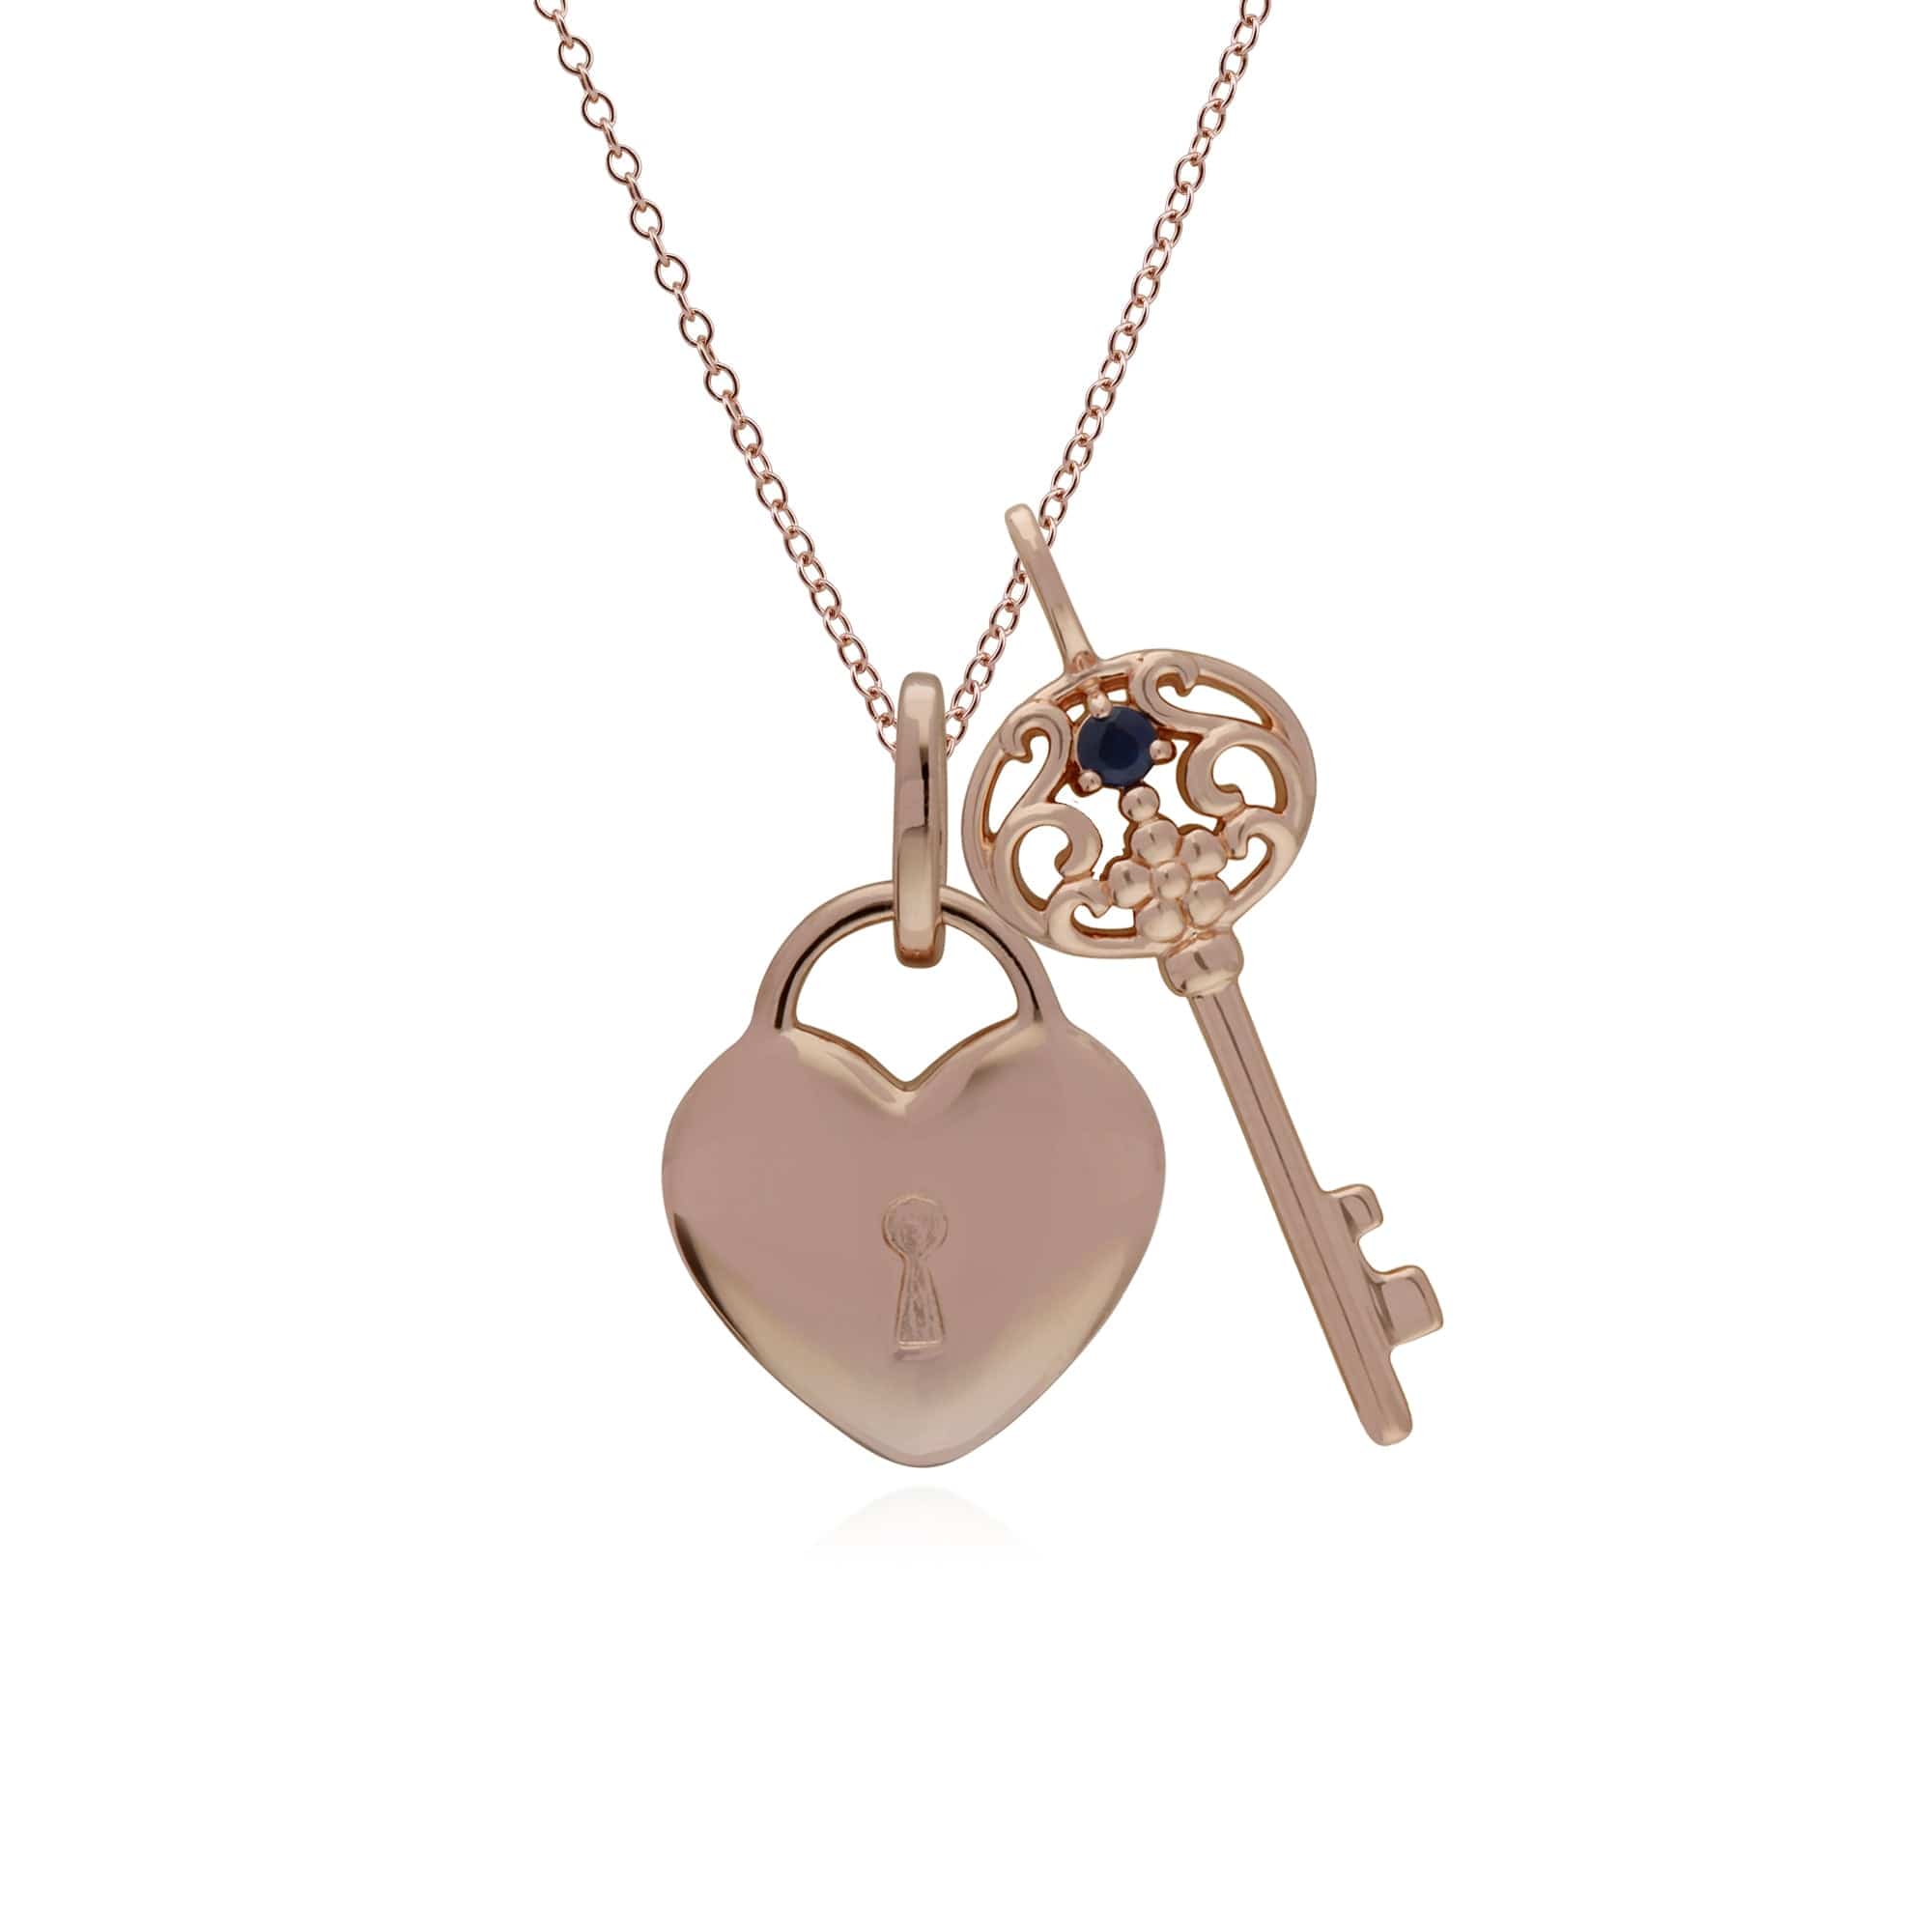 270P026701925-270P026901925 Classic Heart Lock Pendant & Sapphire Big Key Charm in Rose Gold Plated 925 Sterling Silver 1